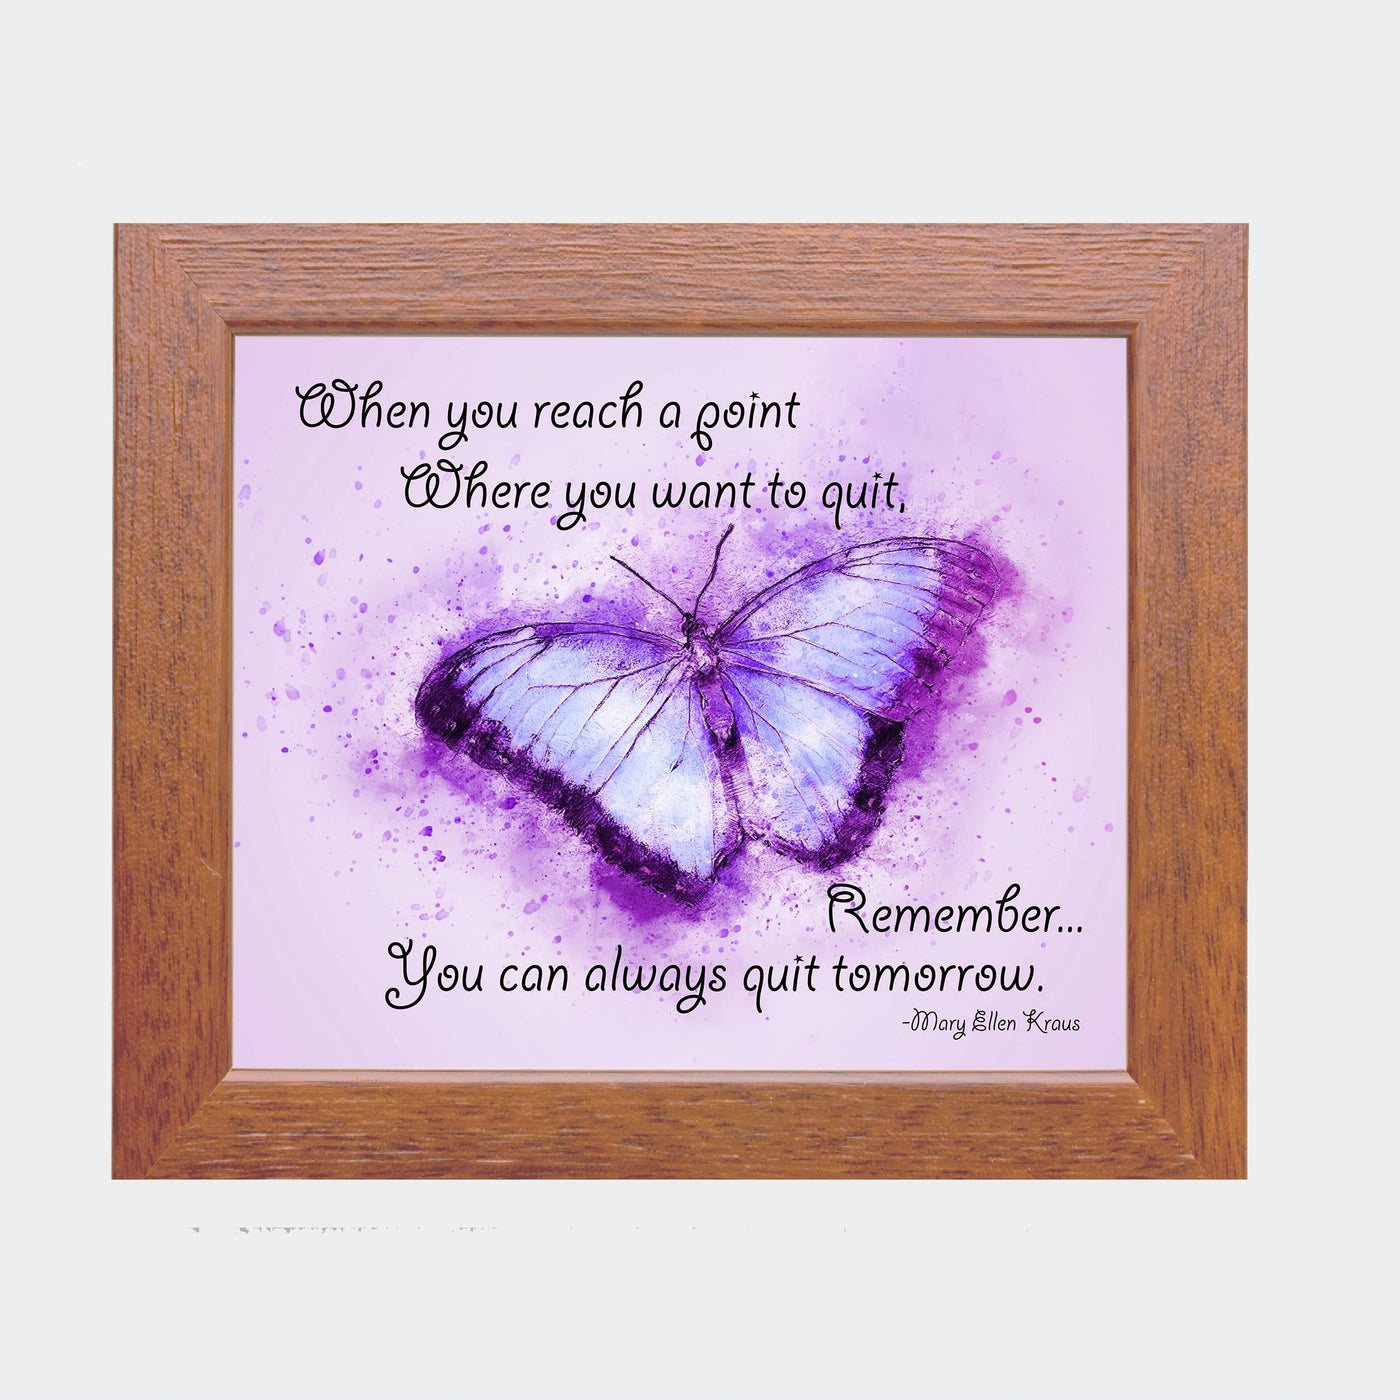 Remember, You Can Always Quit Tomorrow-Inspirational Quotes Wall Sign -10 x 8" Purple Butterfly Painting Art Print -Ready to Frame. Vintage Home-Girls Bedroom-Office-School-Teen Decor. Great Gift!